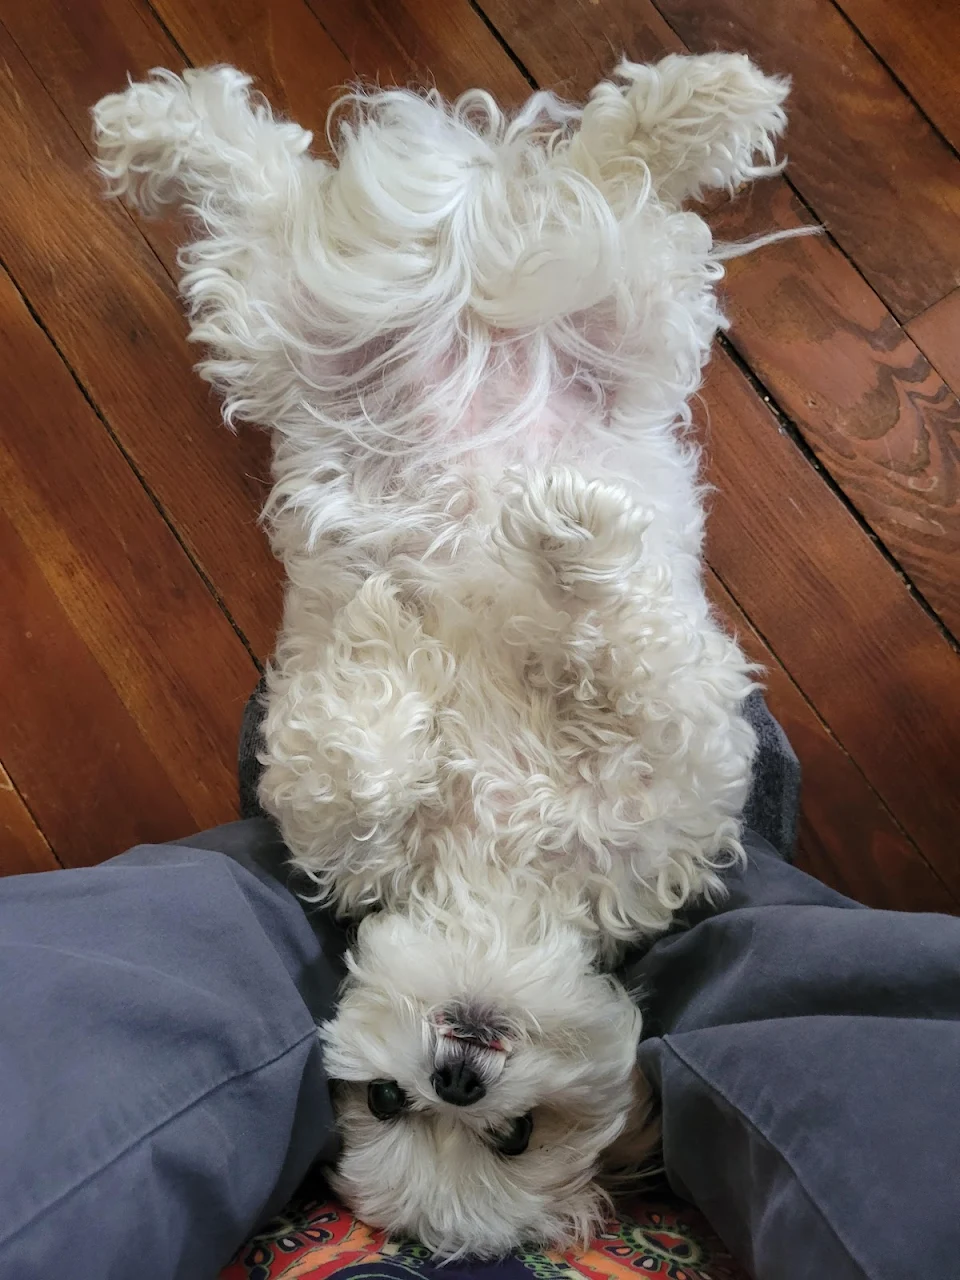 Daisy asking for some belly rubbin'